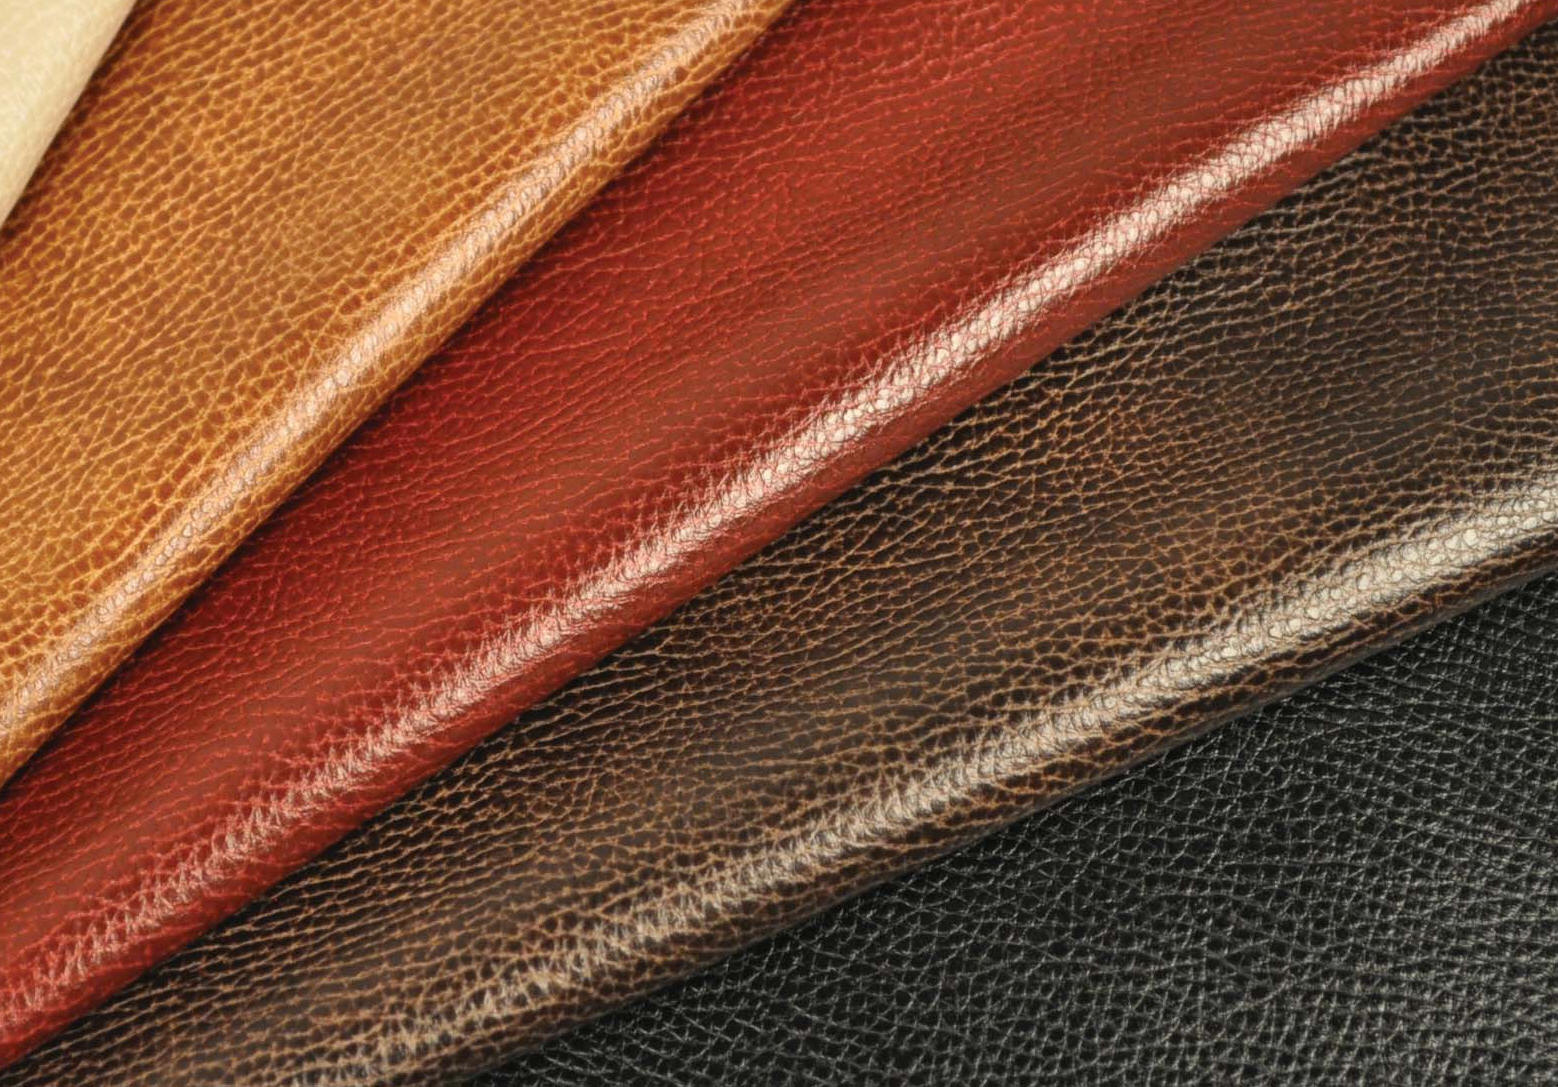 Leather Meaning and Definition